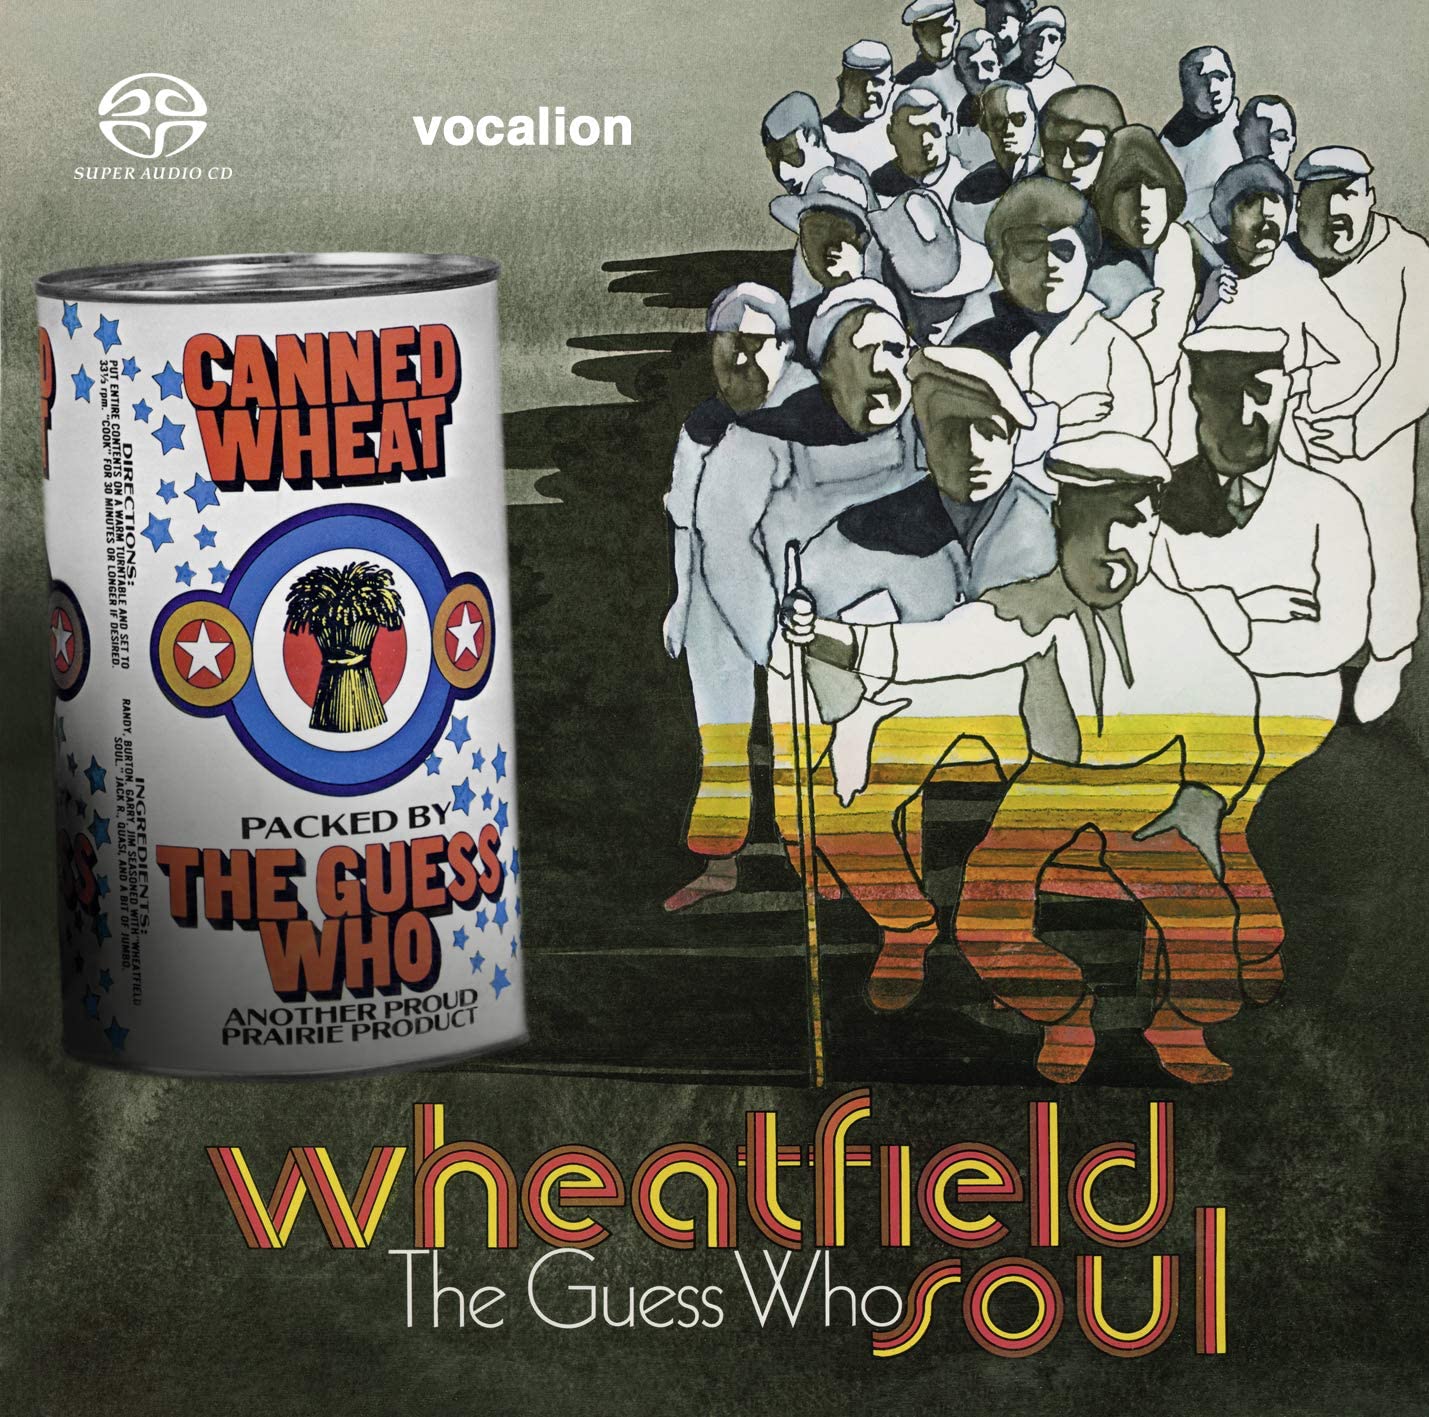 The Guess Who – Wheatfield Soul & Canned Wheat (1969) [Reissue 2019] MCH SACD ISO + Hi-Res FLAC